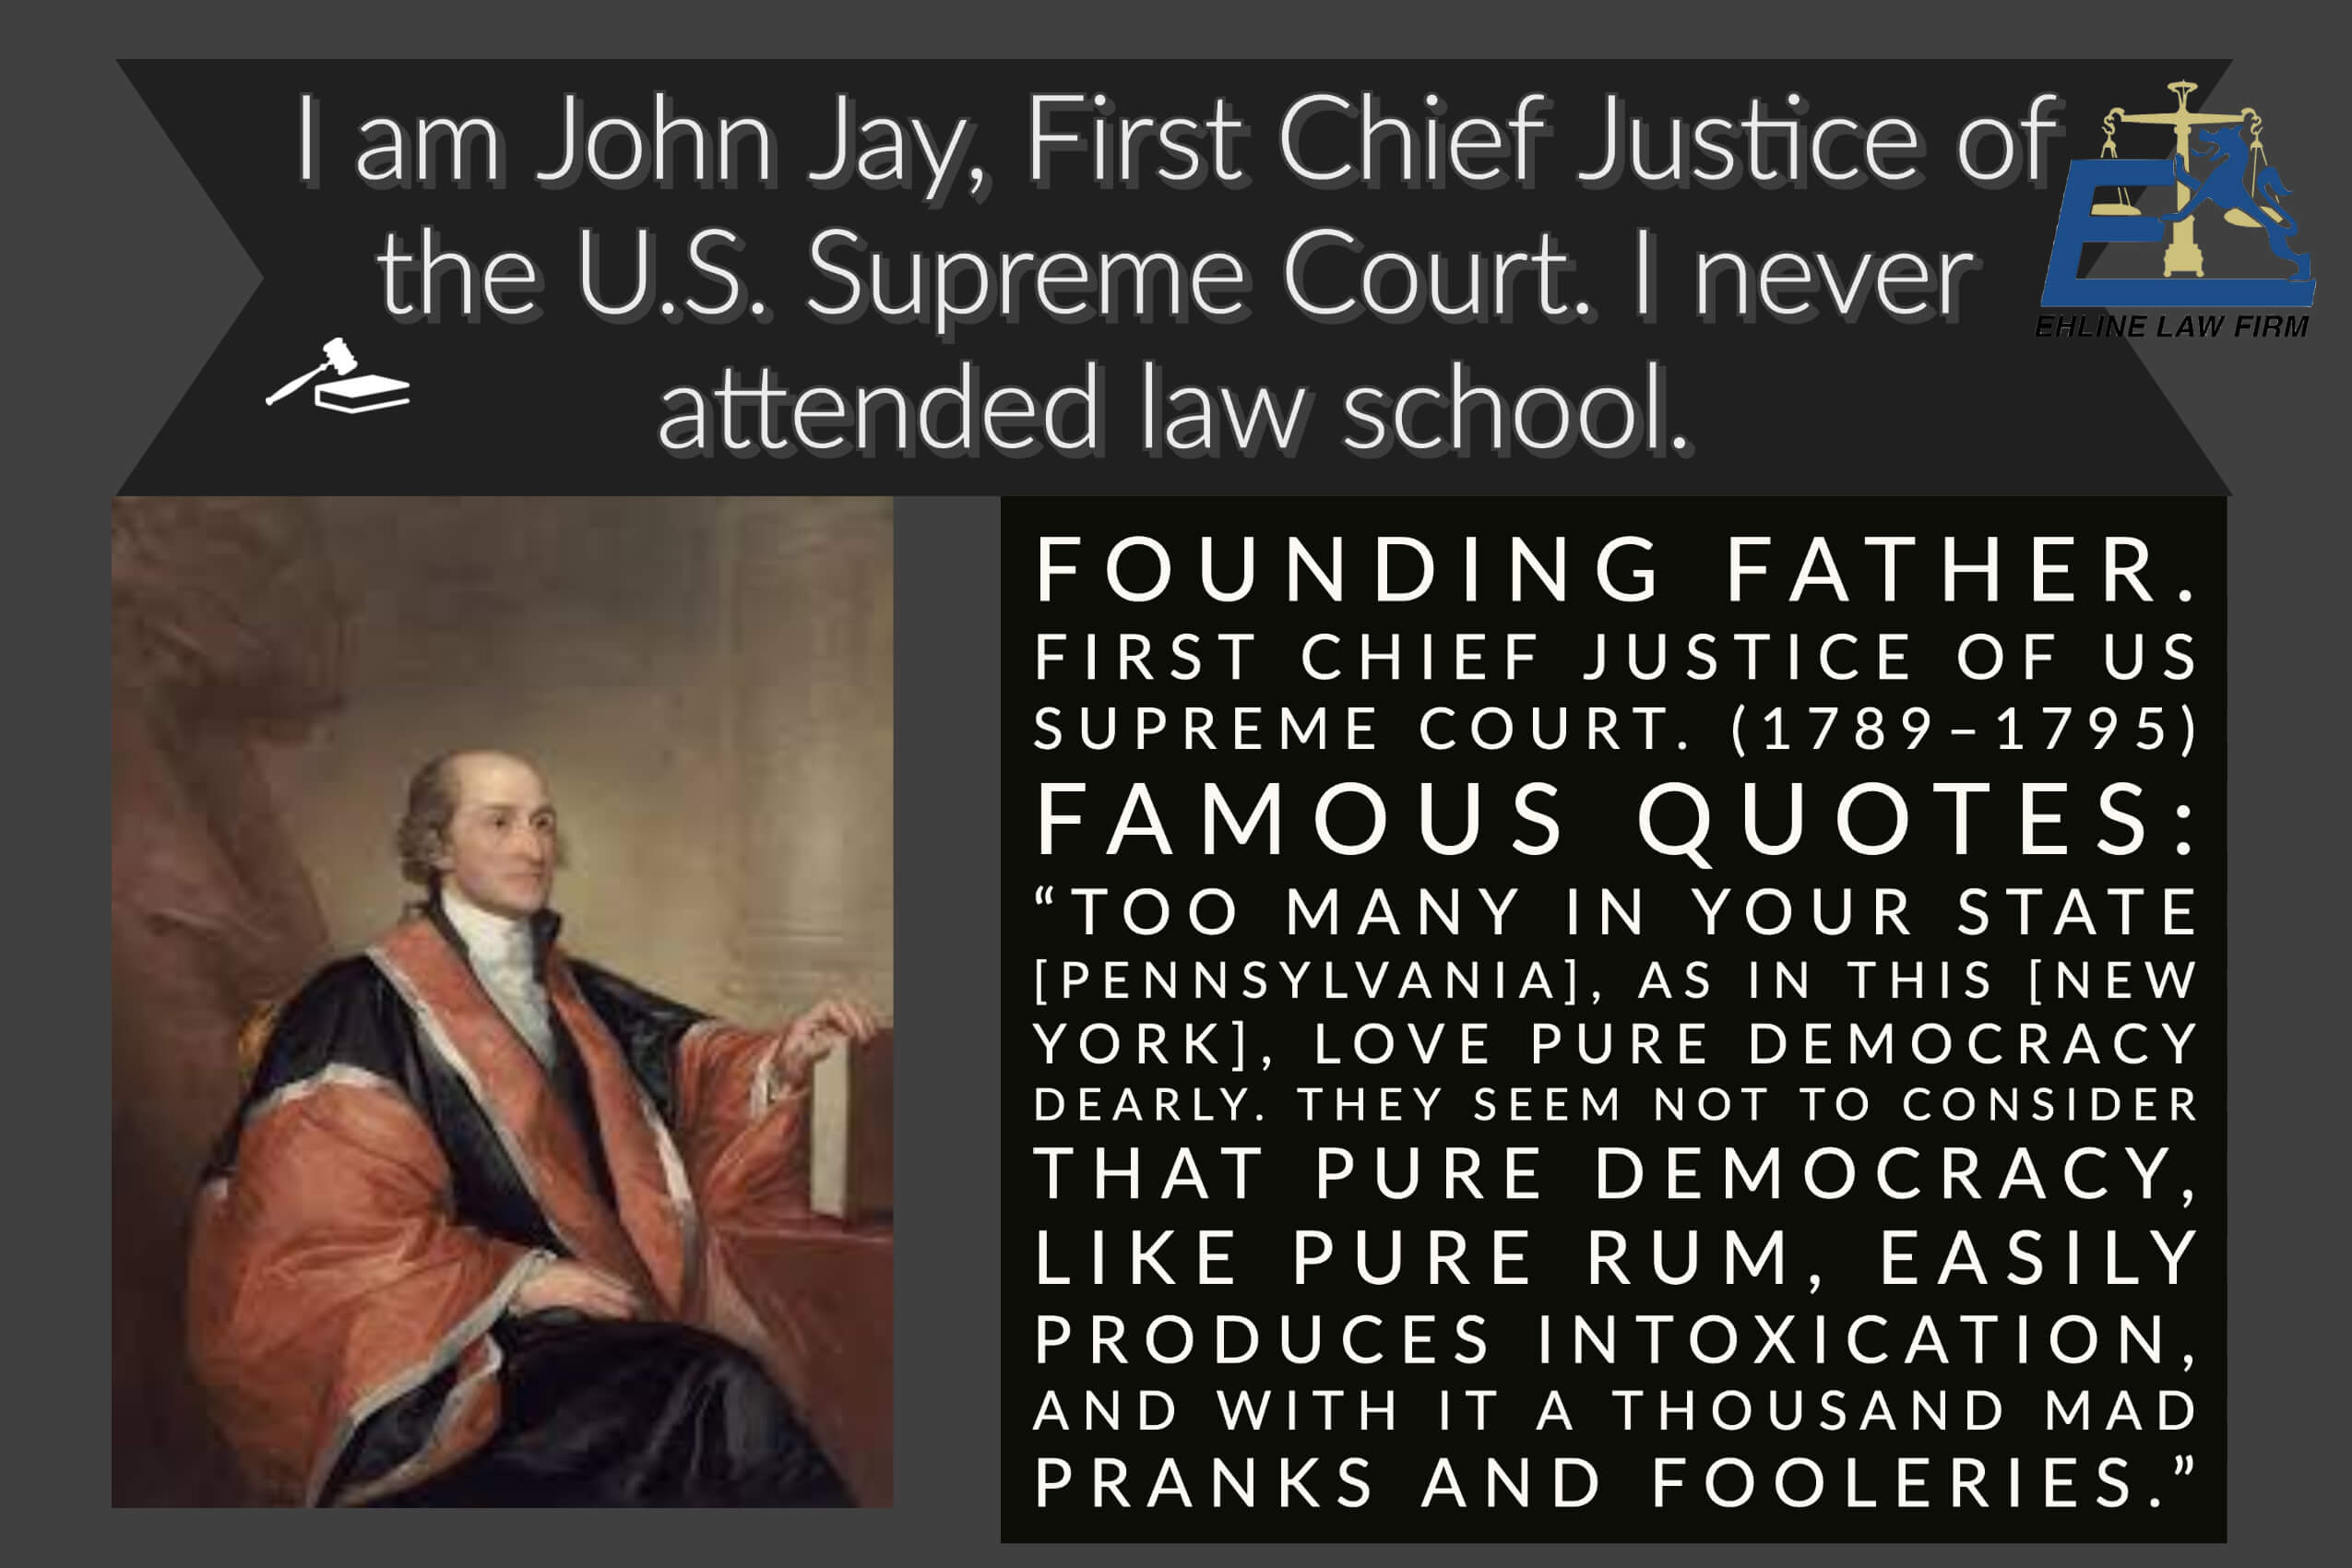 Injury lawyer infograph about John Jay never attending law school.